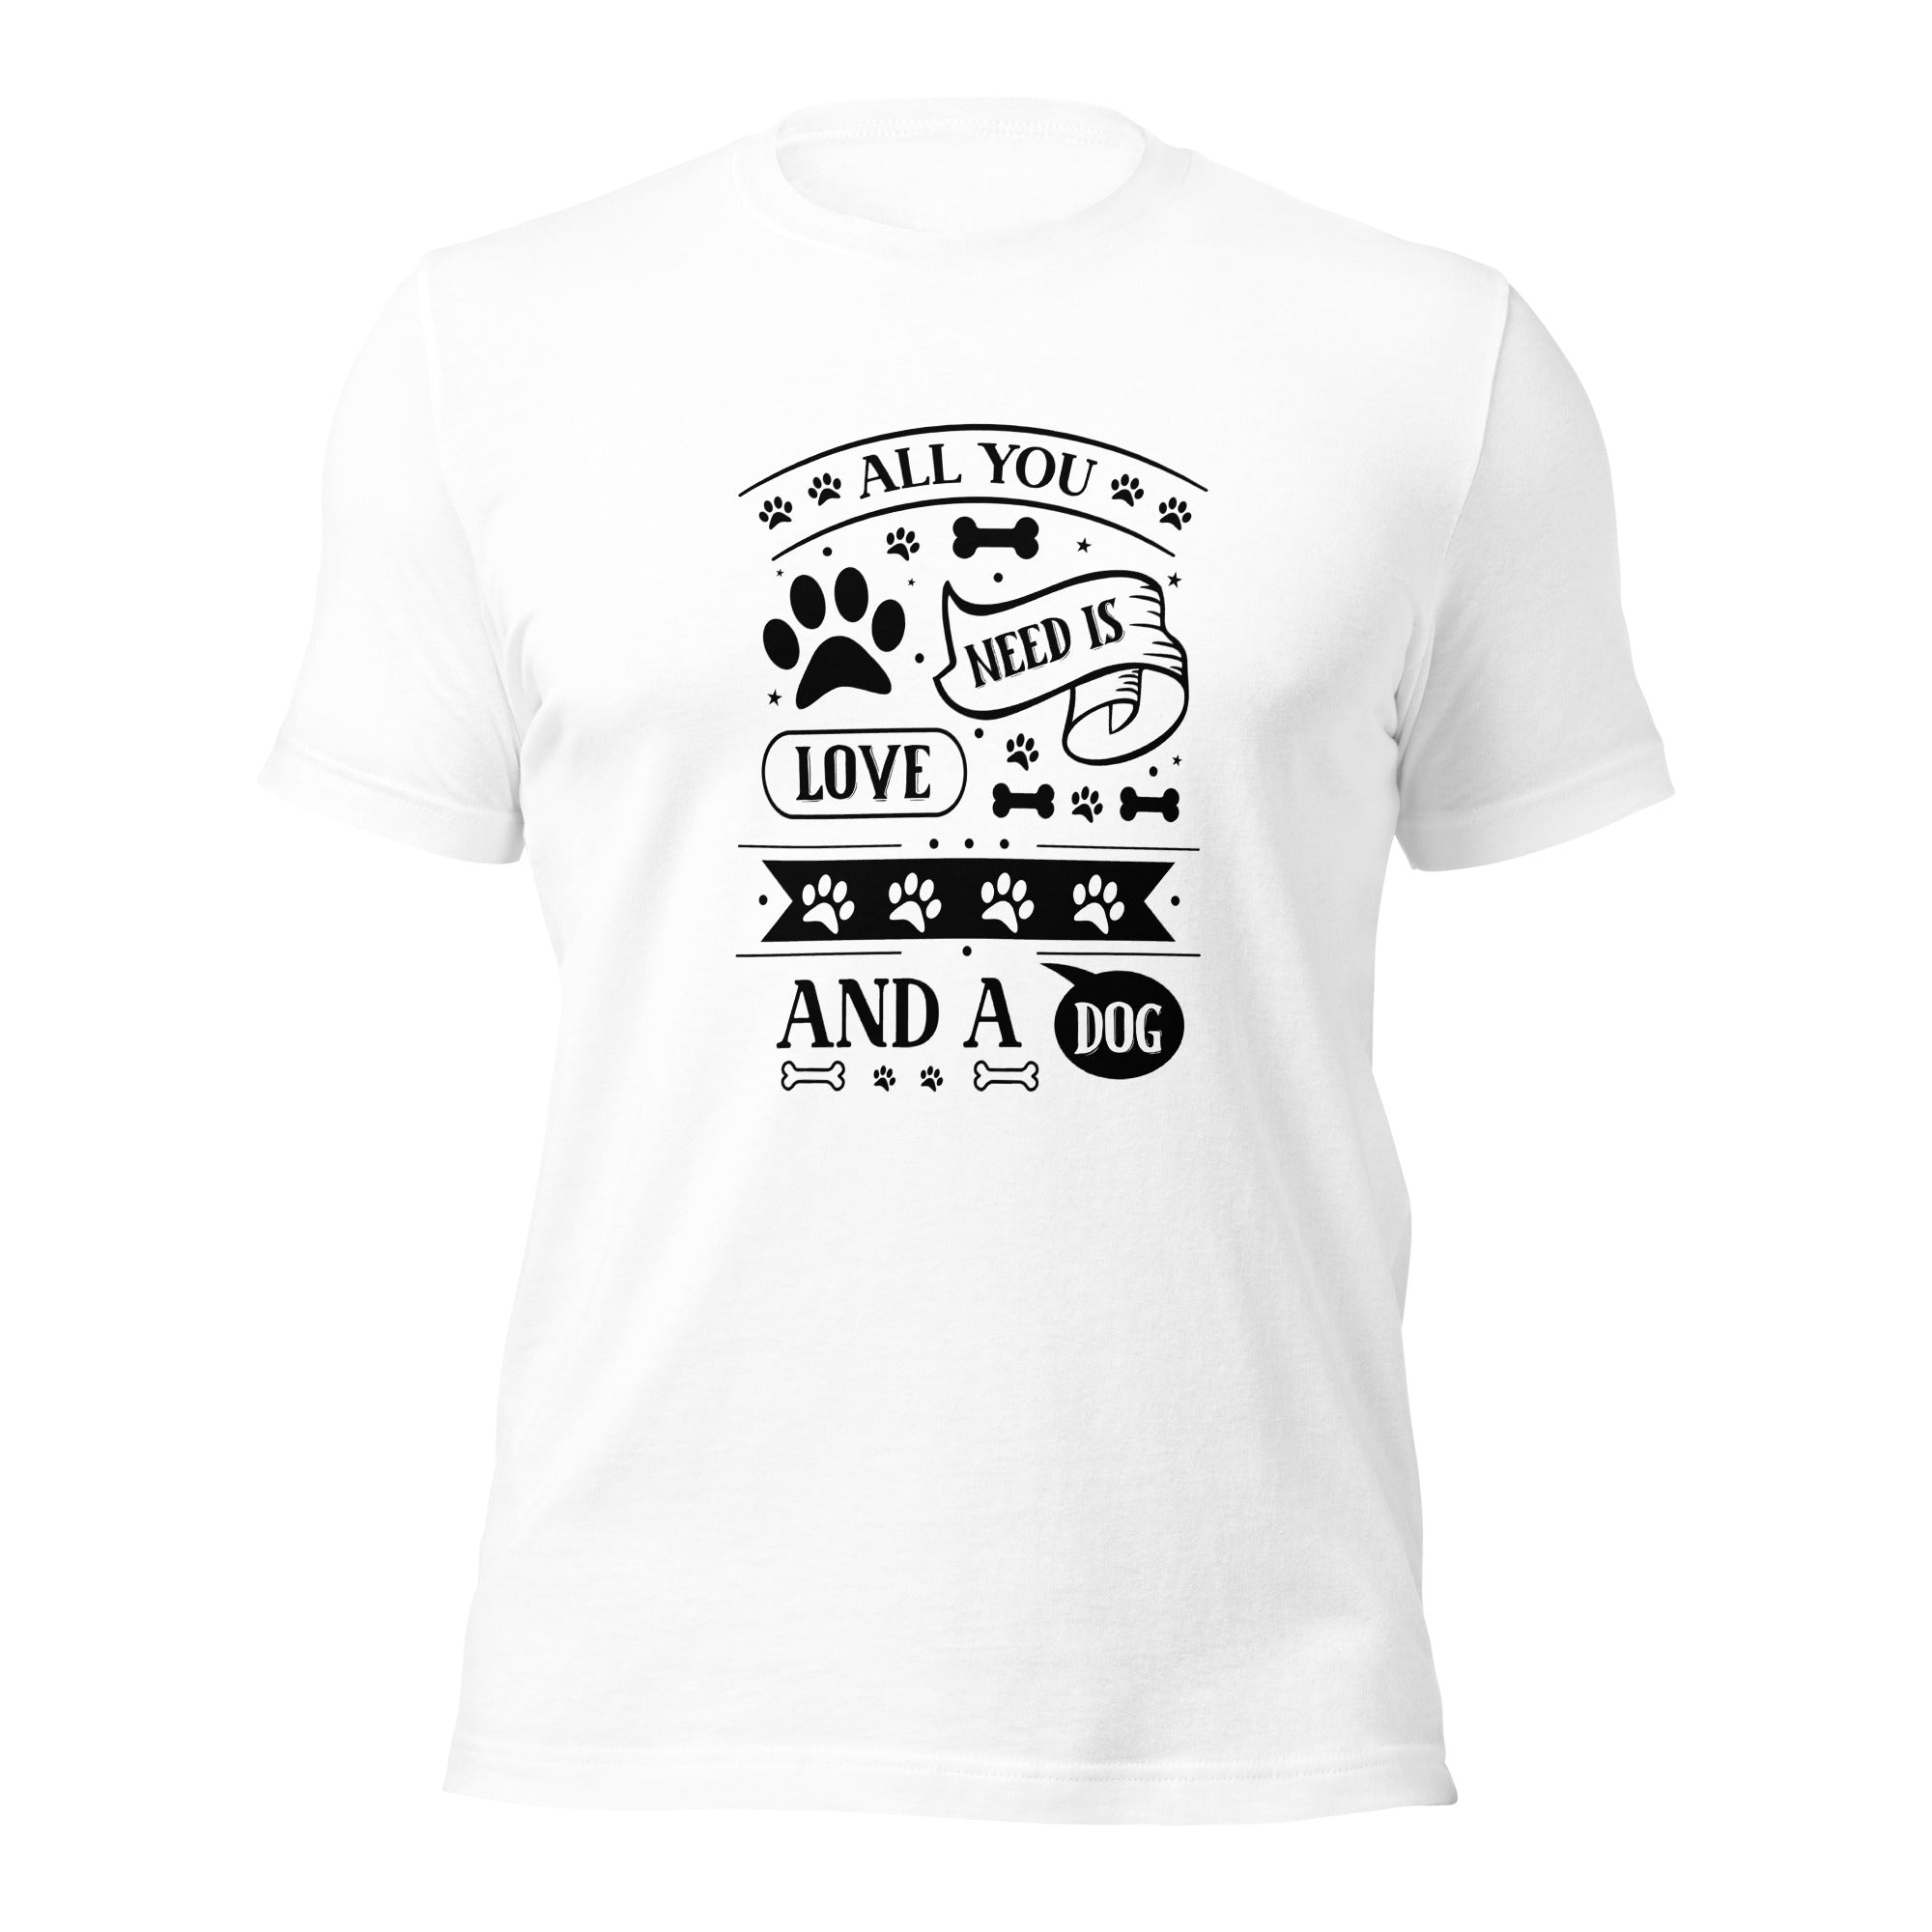 Unisex t-shirt- All You Need Is Love And A Dog